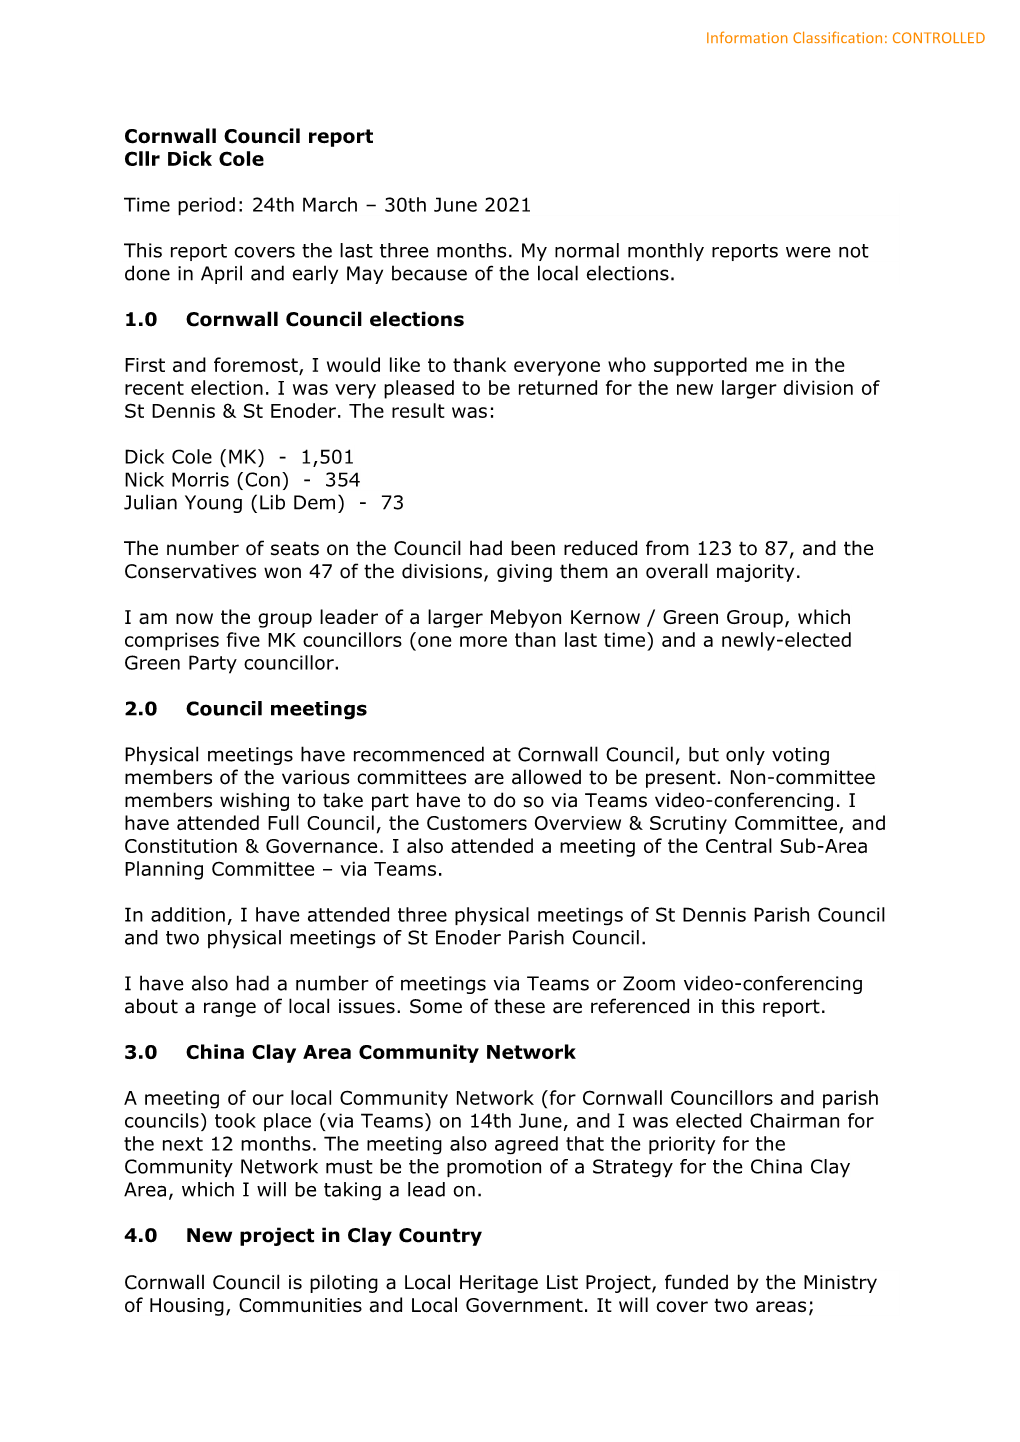 Cornwall Council Report Cllr Dick Cole Time Period